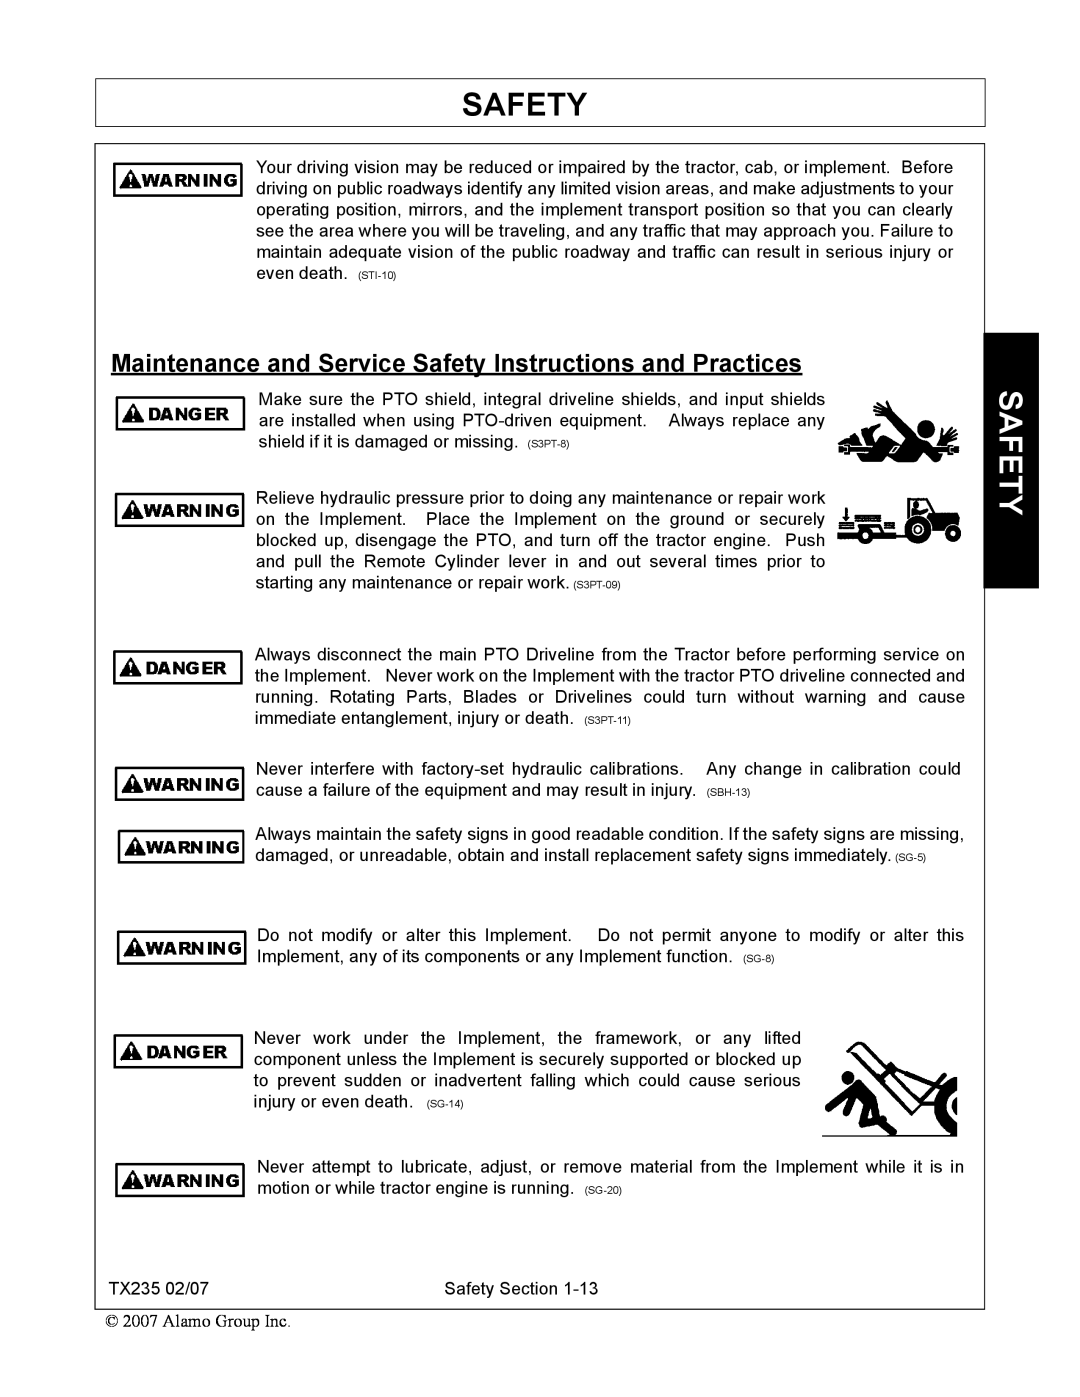 Alamo TX235 manual Maintenance and Service Safety Instructions and Practices 